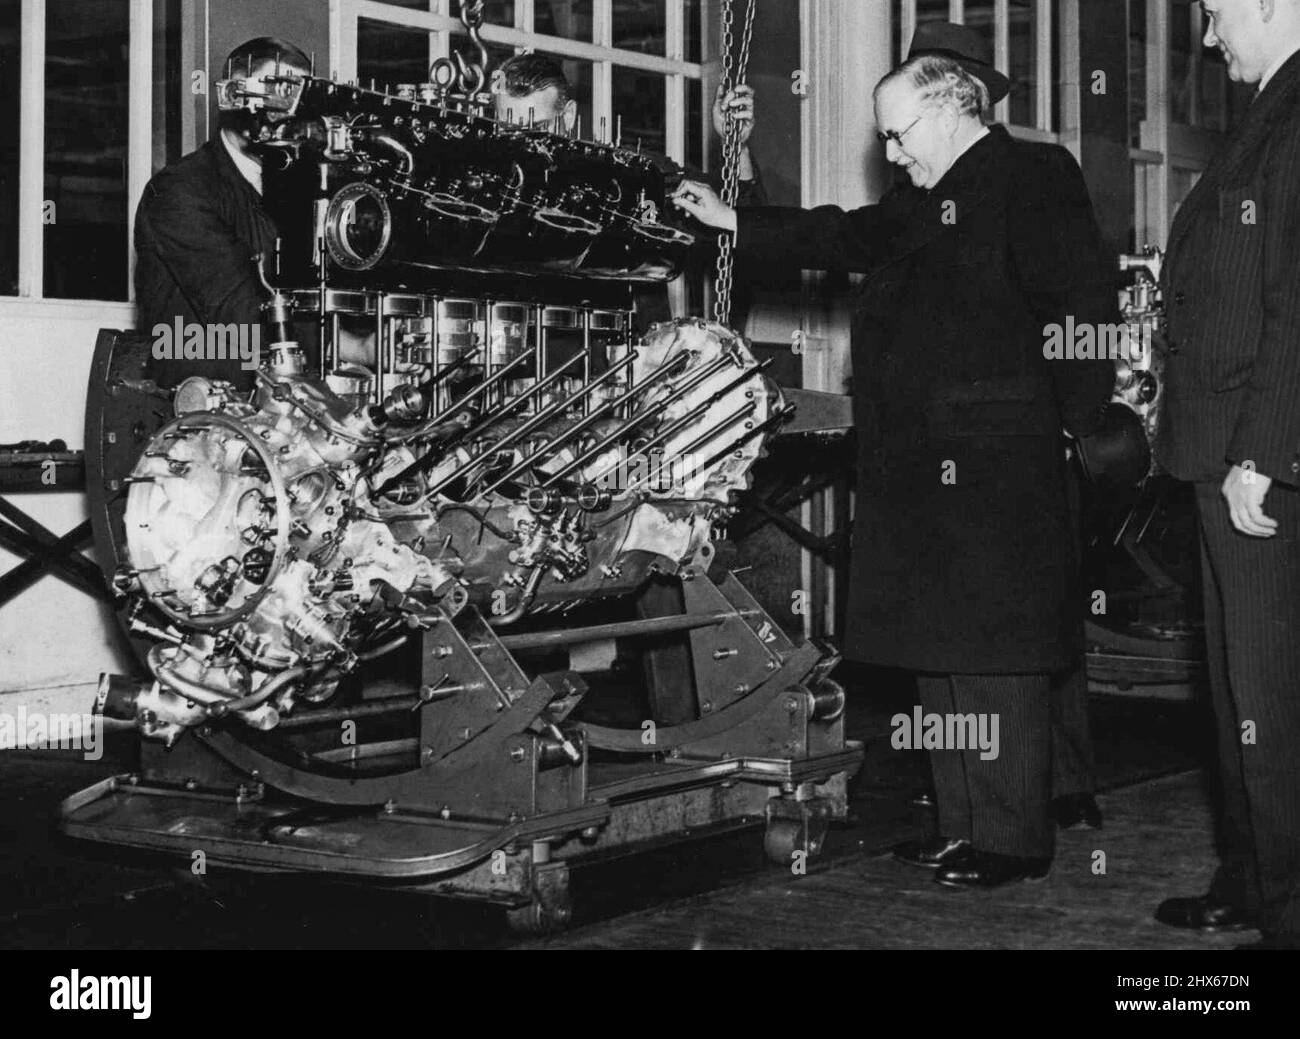 Air Minister Visits Aero Engine Works -- Sir Kingsley Wood watching the assembly of aero engines during his visit to the Rolls-Royce works yesterday. Sir Kingsley Wood, the Air Minister, yesterday paid a visit to the Rolls-Royce aero engine works at Derby. October 12, 1938. (Photo by Topical Press). Stock Photo